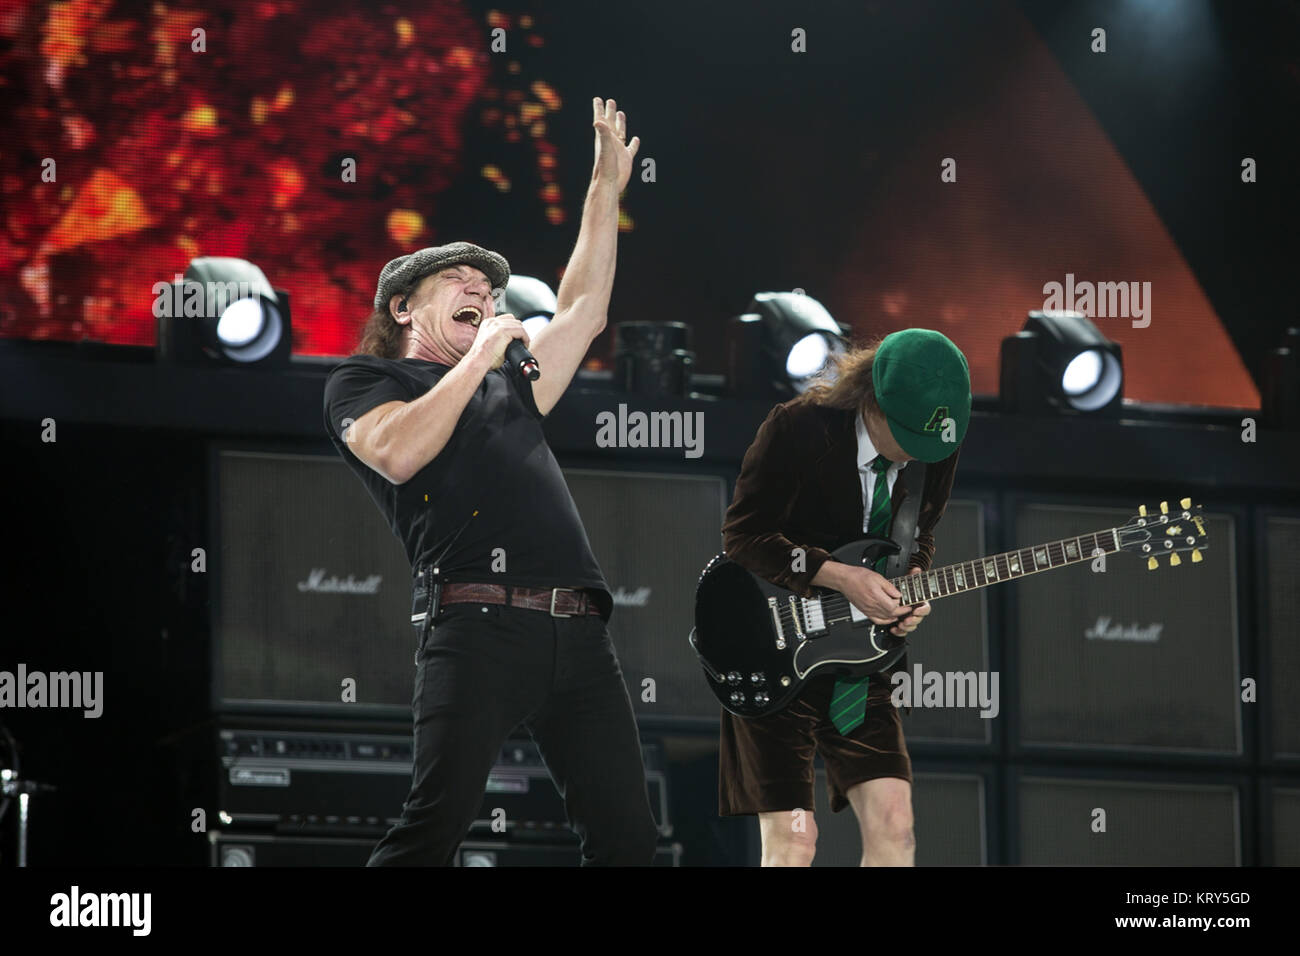 The Australian rock band AC/DC performs a live concert at Valle Hovin Stadion in Oslo as part of the Rock or Bust World 2015 Tour. Here vocalist Brian Johnson seen live on stage with guitarist Angus Young. Norway, 17/07 2015. Stock Photo